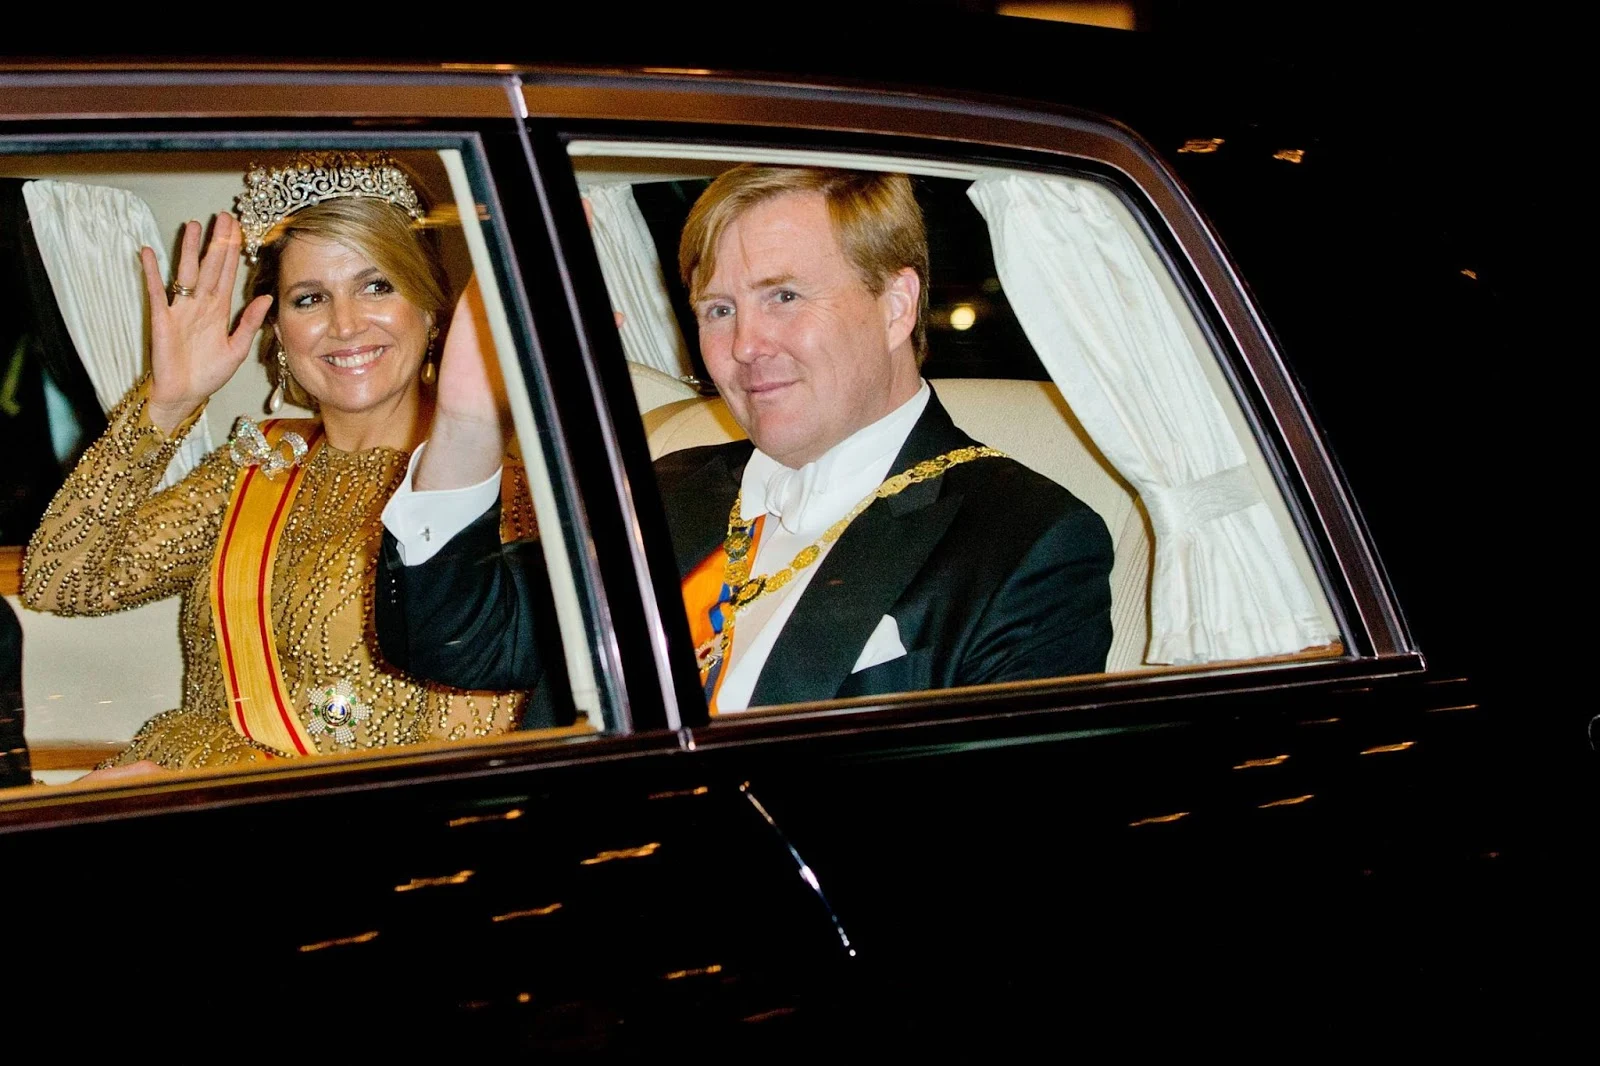  visit Japan - King Willem-Alexander and Queen Maxima